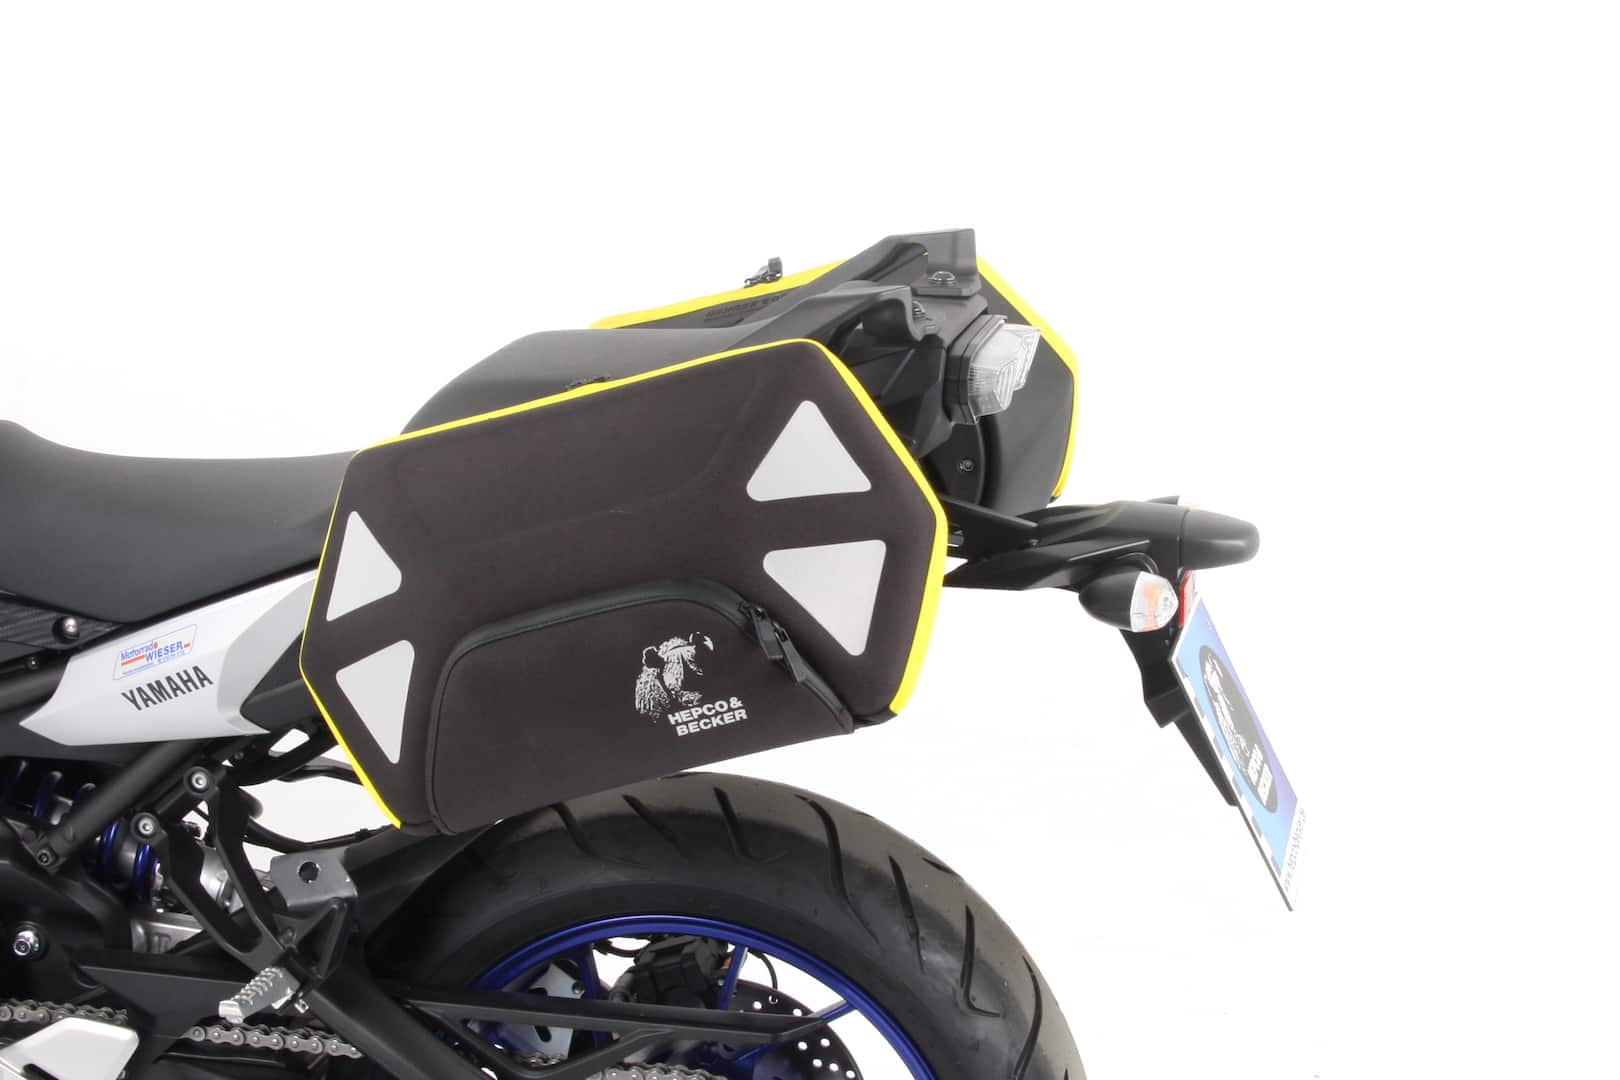 C-Bow sidecarrier for Yamaha MT-09 Tracer ABS (2015-2017)